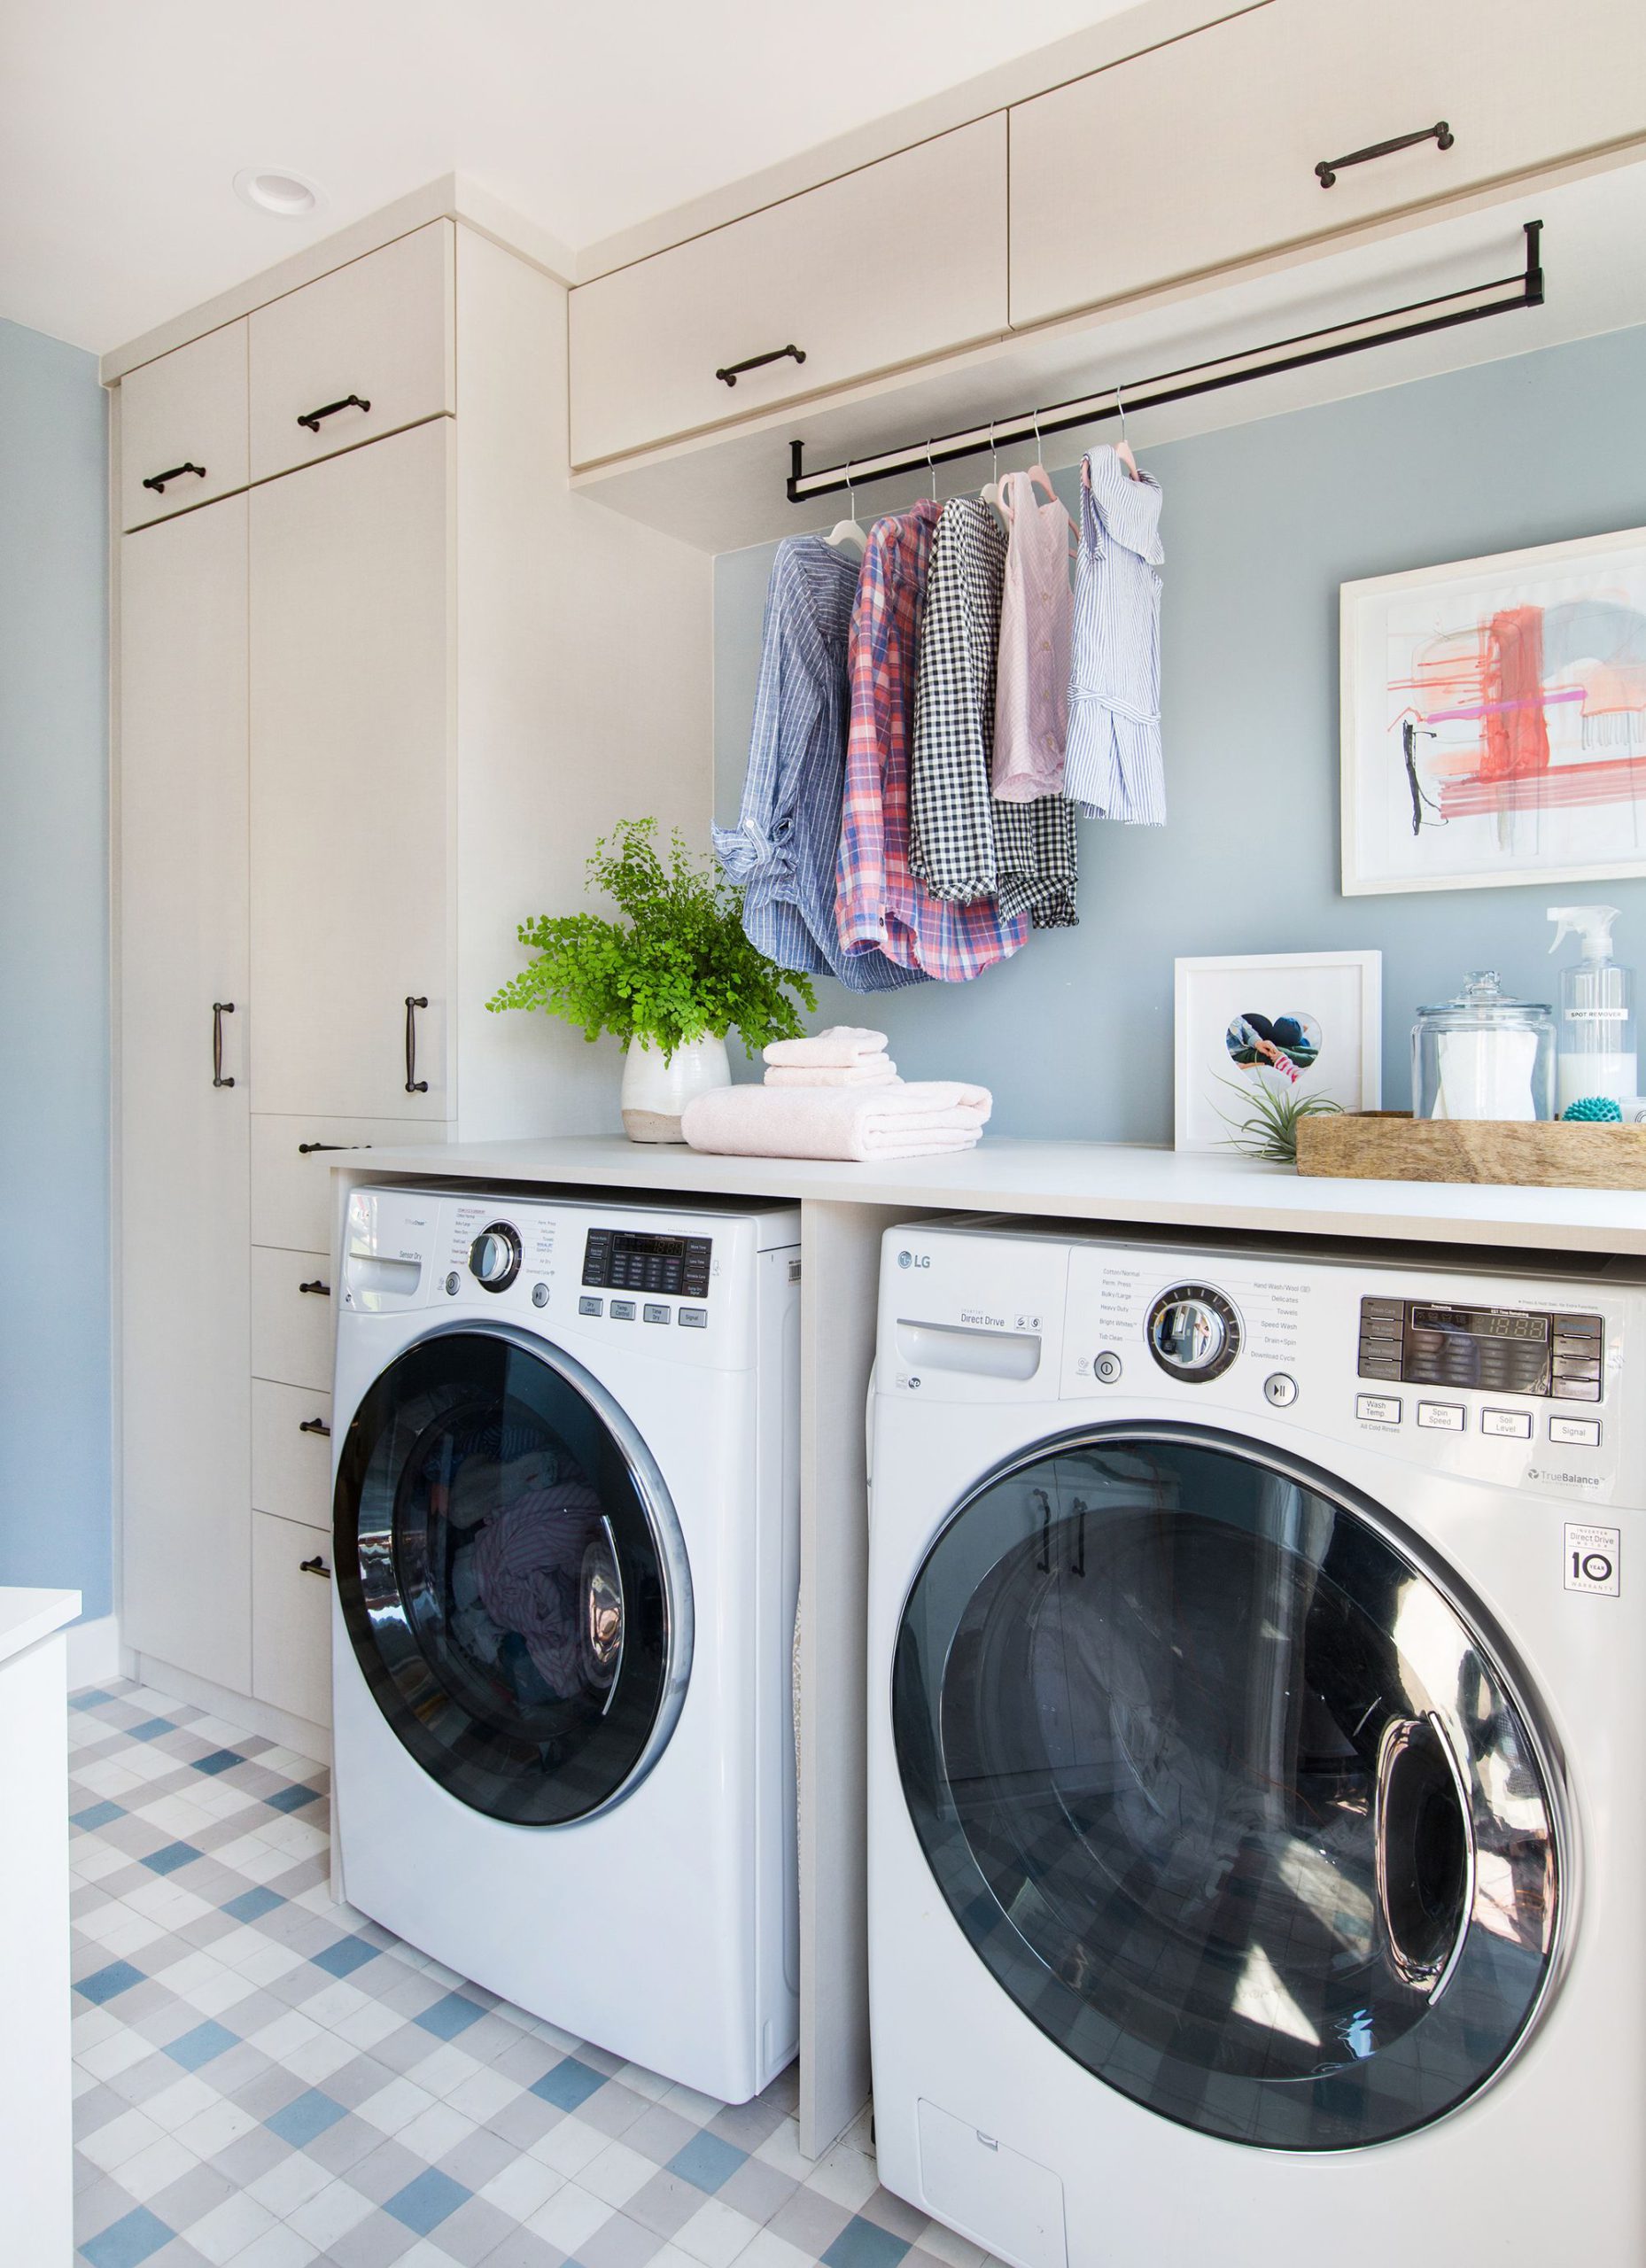 Laundry Room with Space Saving Hanging Storage